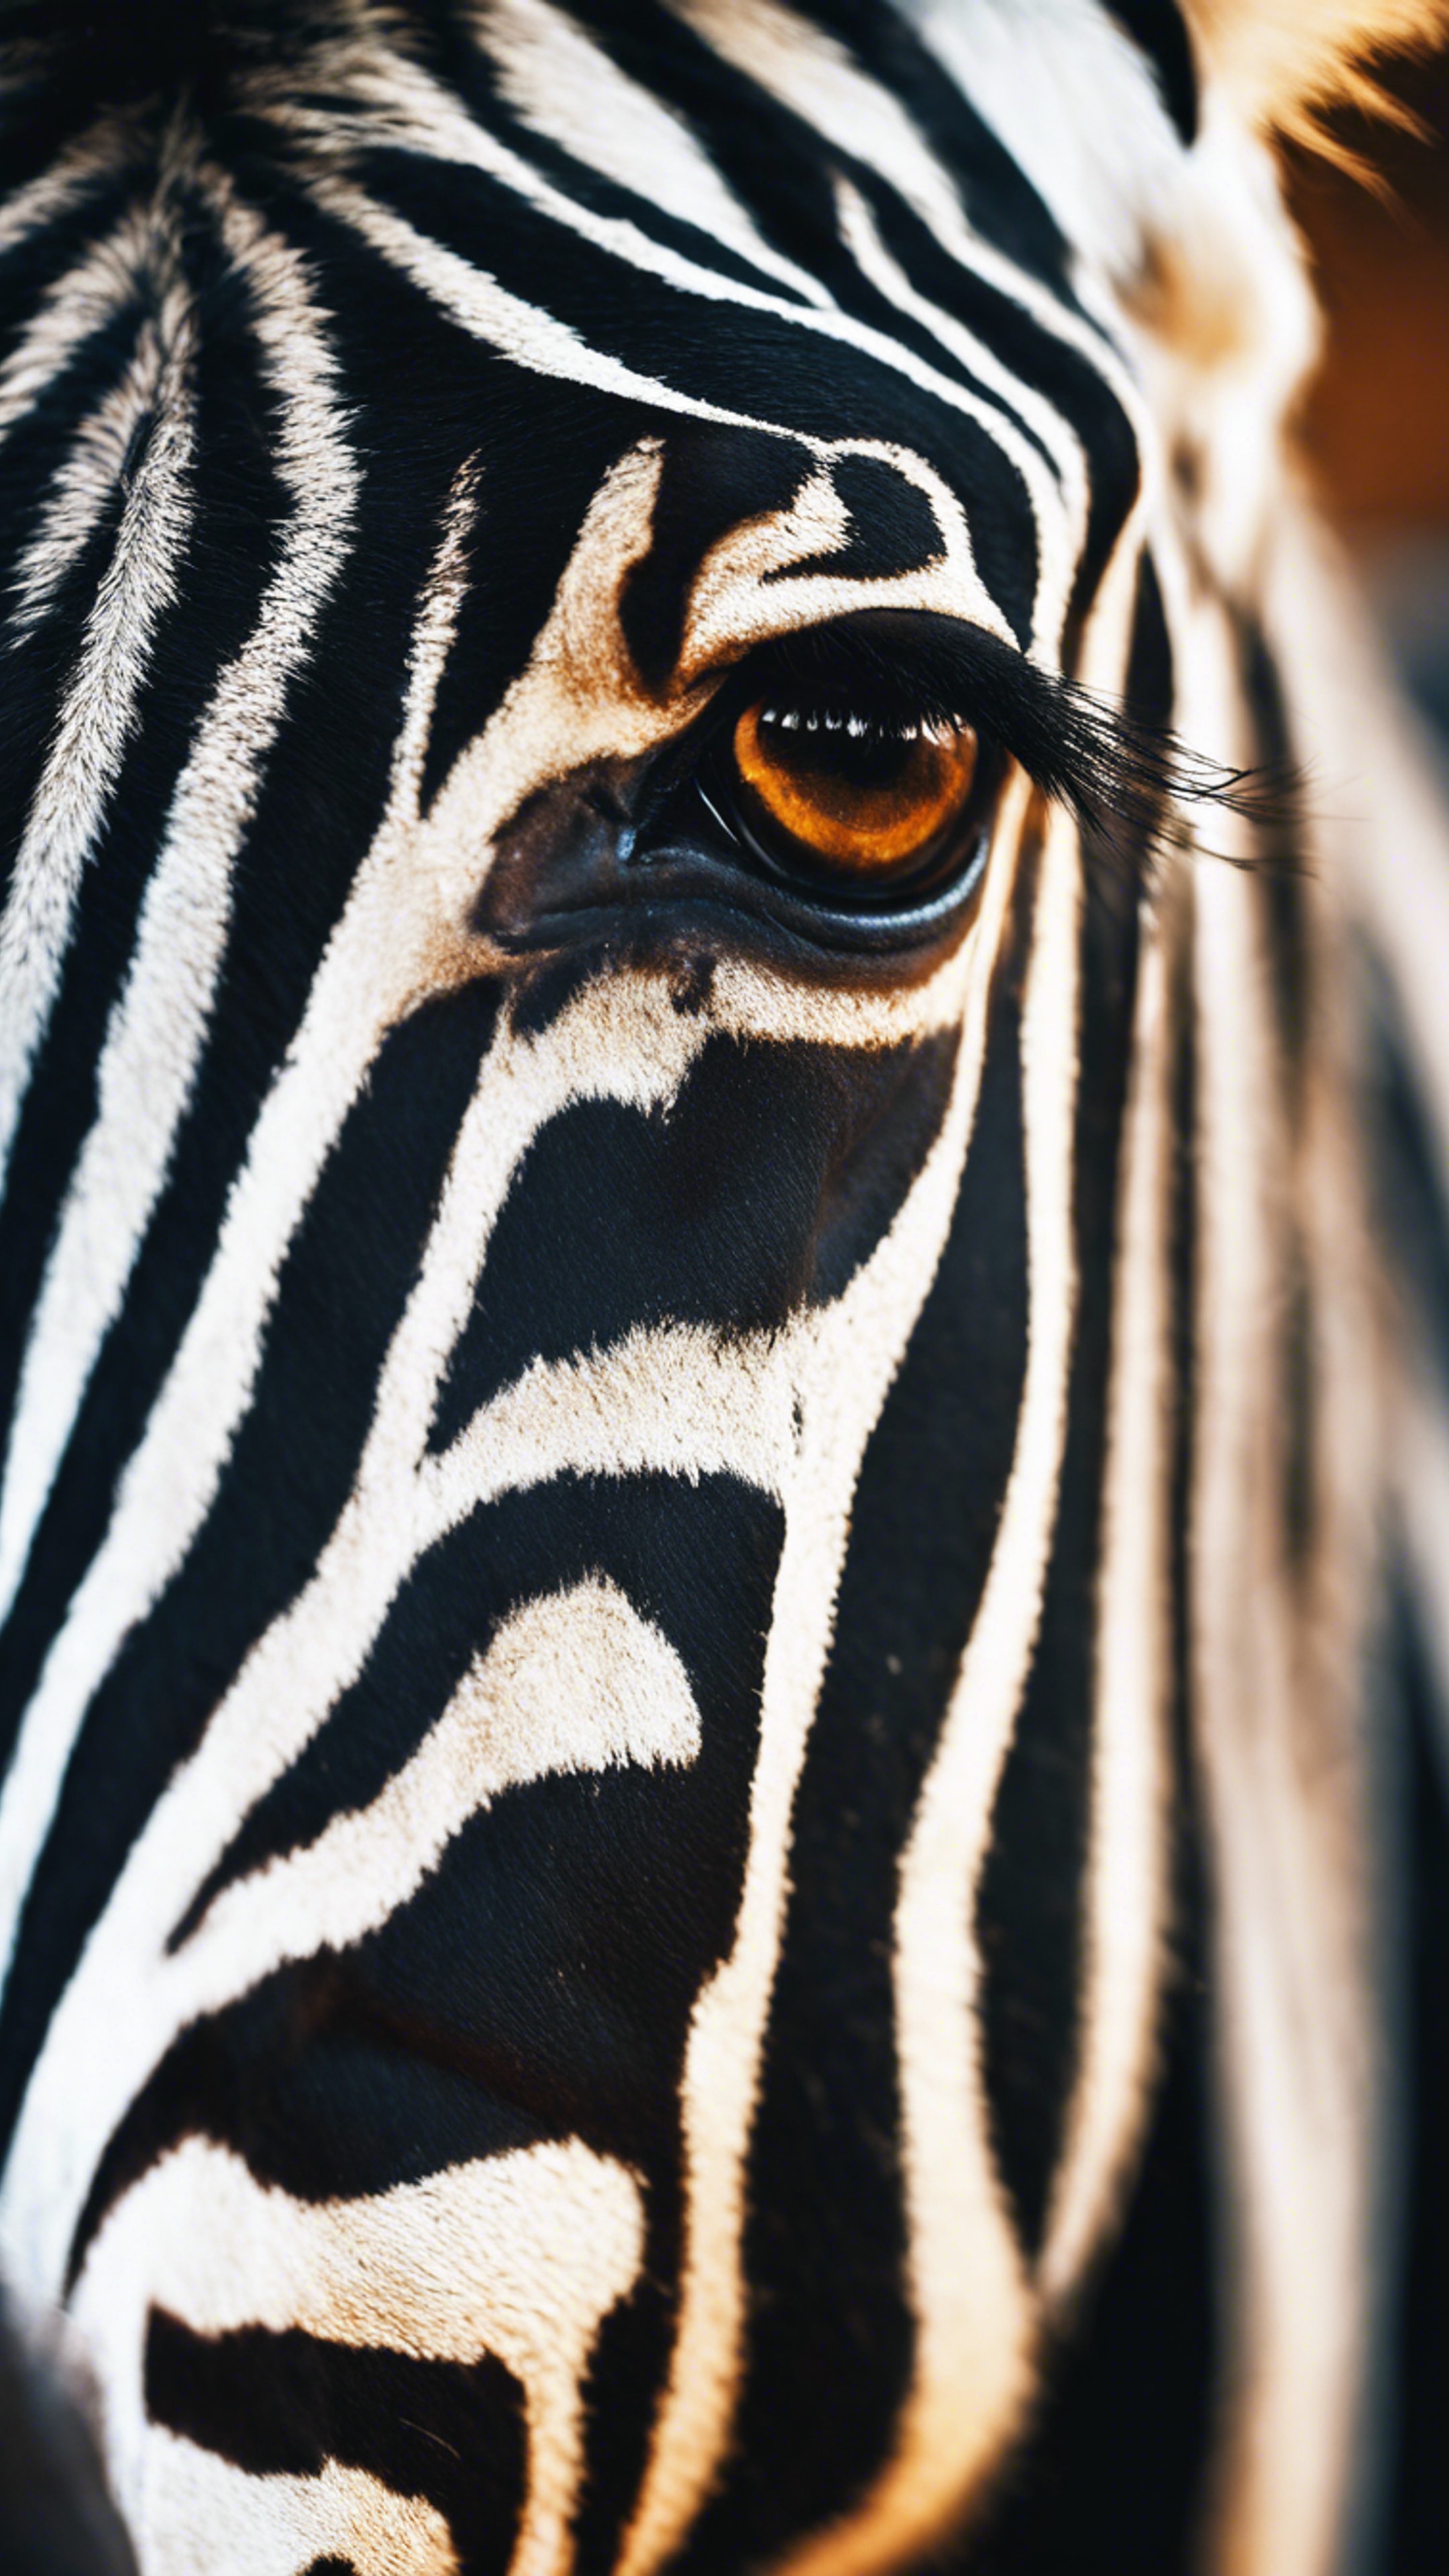 A close-up shot of a zebra's eye expressing strong emotions. 牆紙[ea30c6a0b471421fa723]